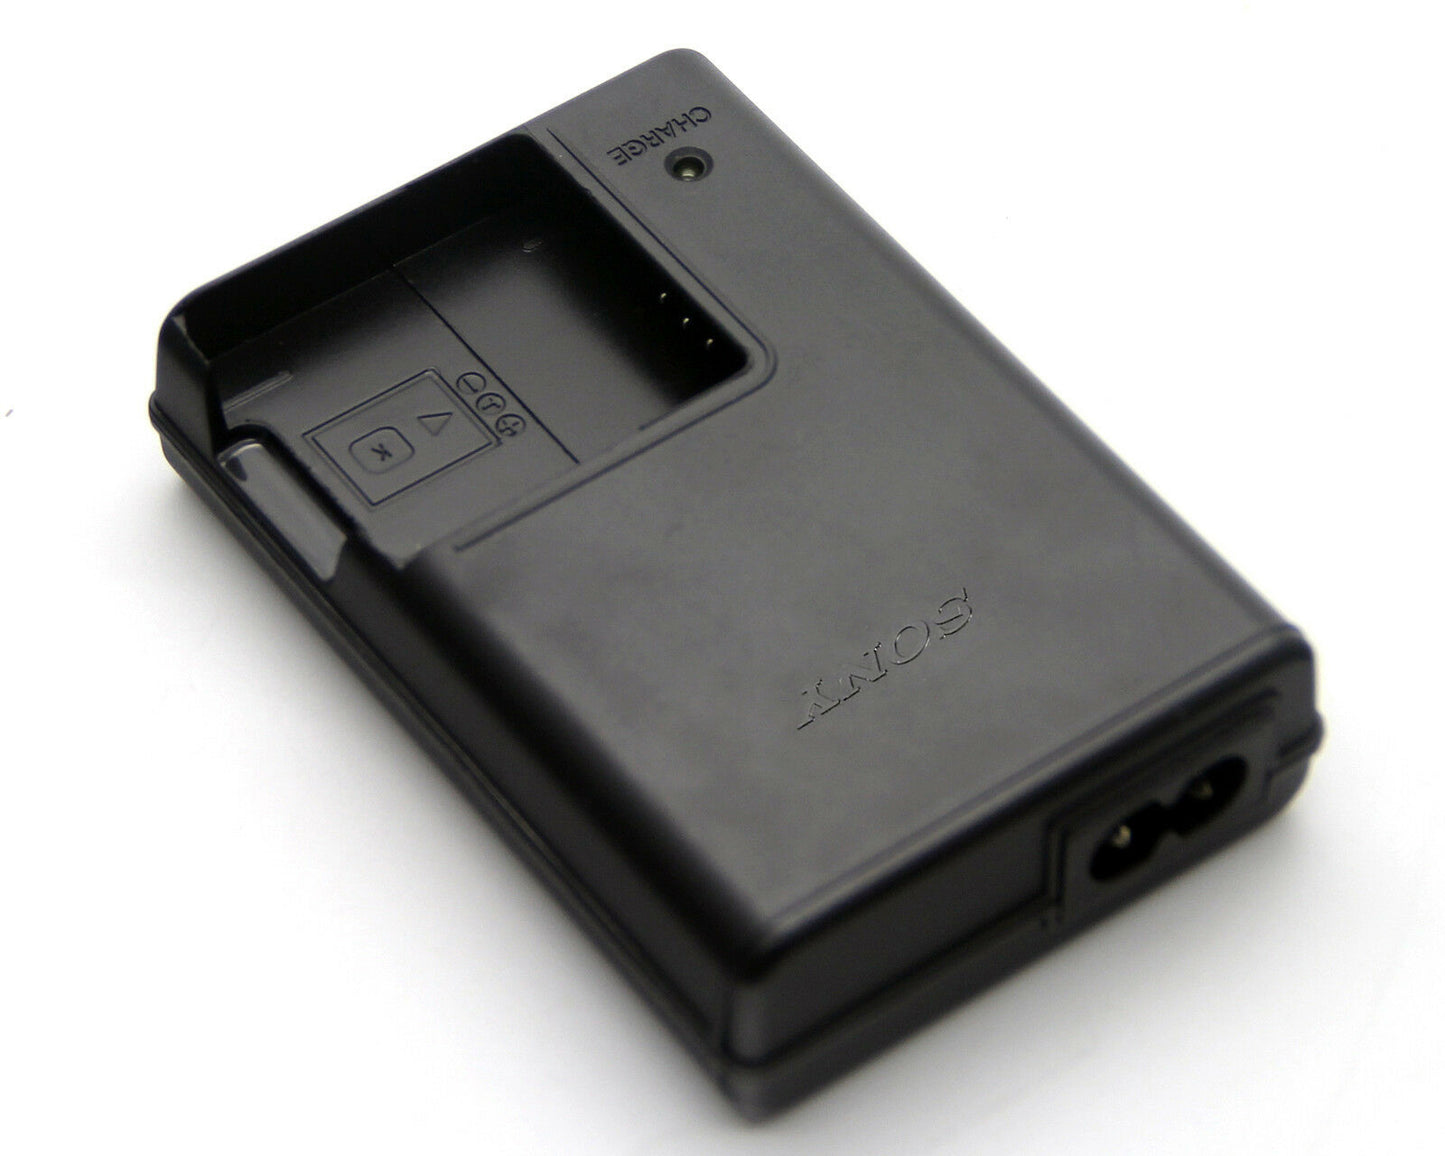 Pxel Sony BC-CSK Battery Charger for Select Sony Cybershot Camera Batteries (NP-BK1) | Class-A, BC-CSK Replacement